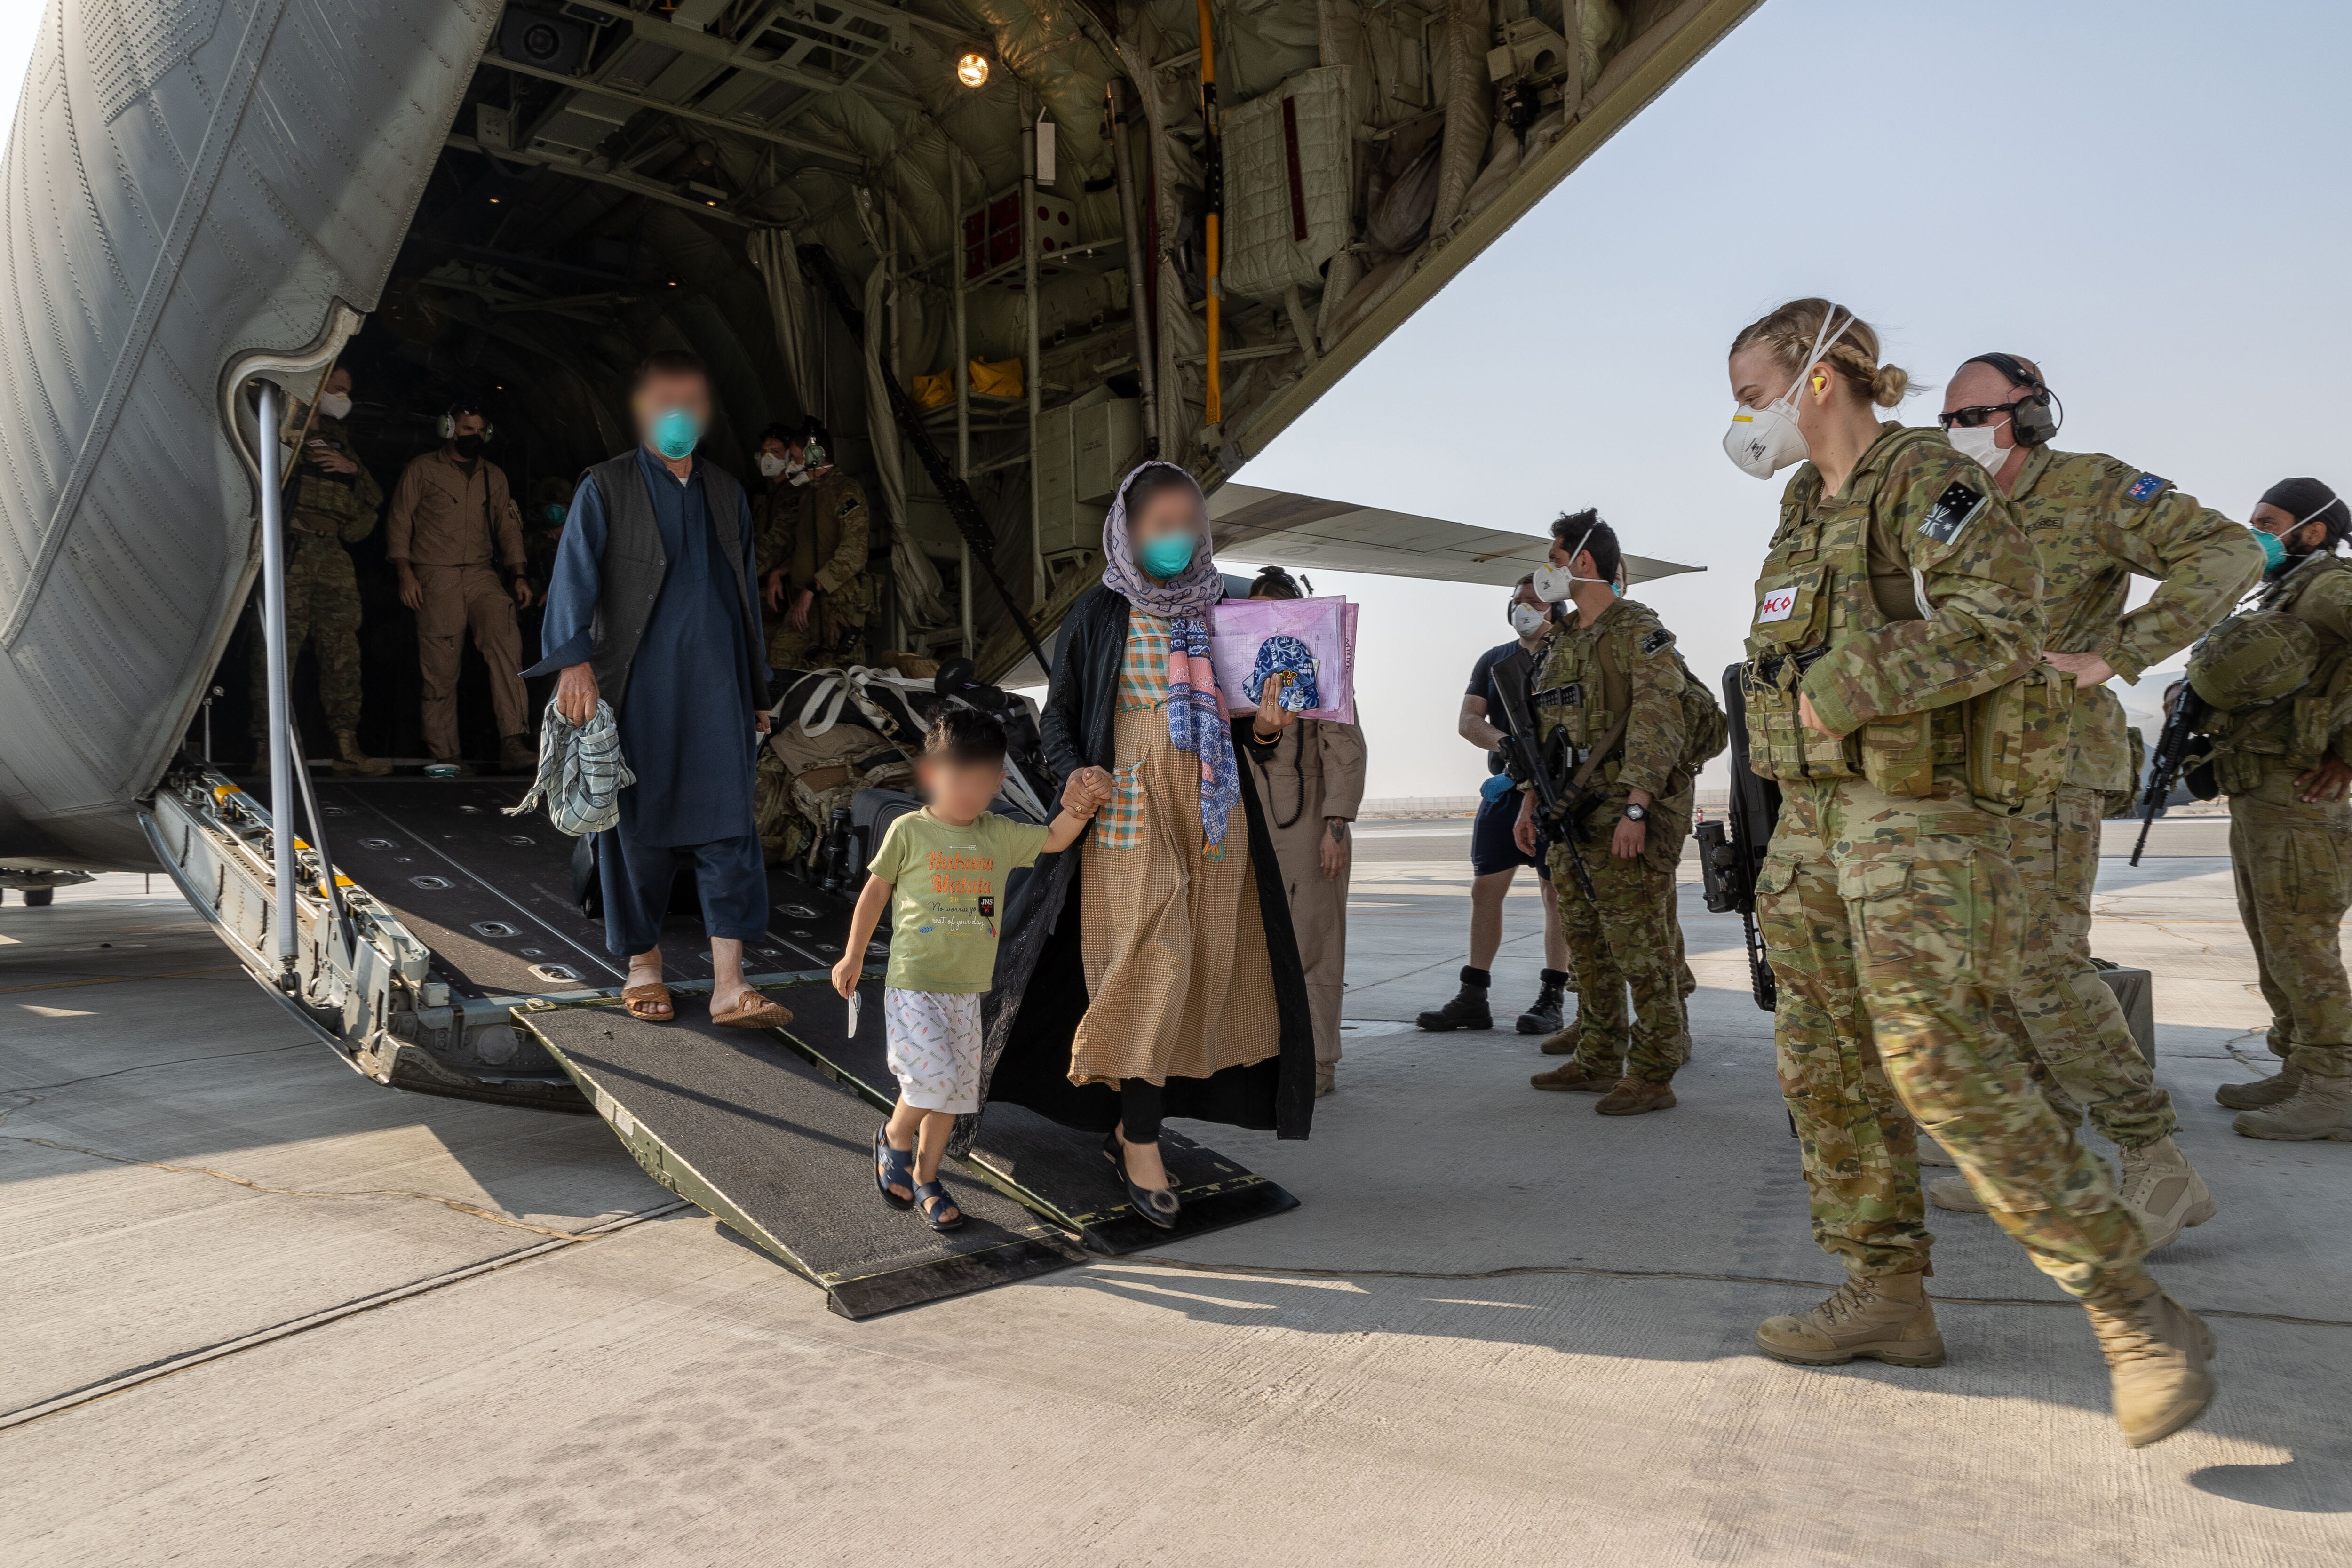 Afghanistan evacuees and soldiers from the Australian Defence Force at Kabul airport on 27 August 2021.